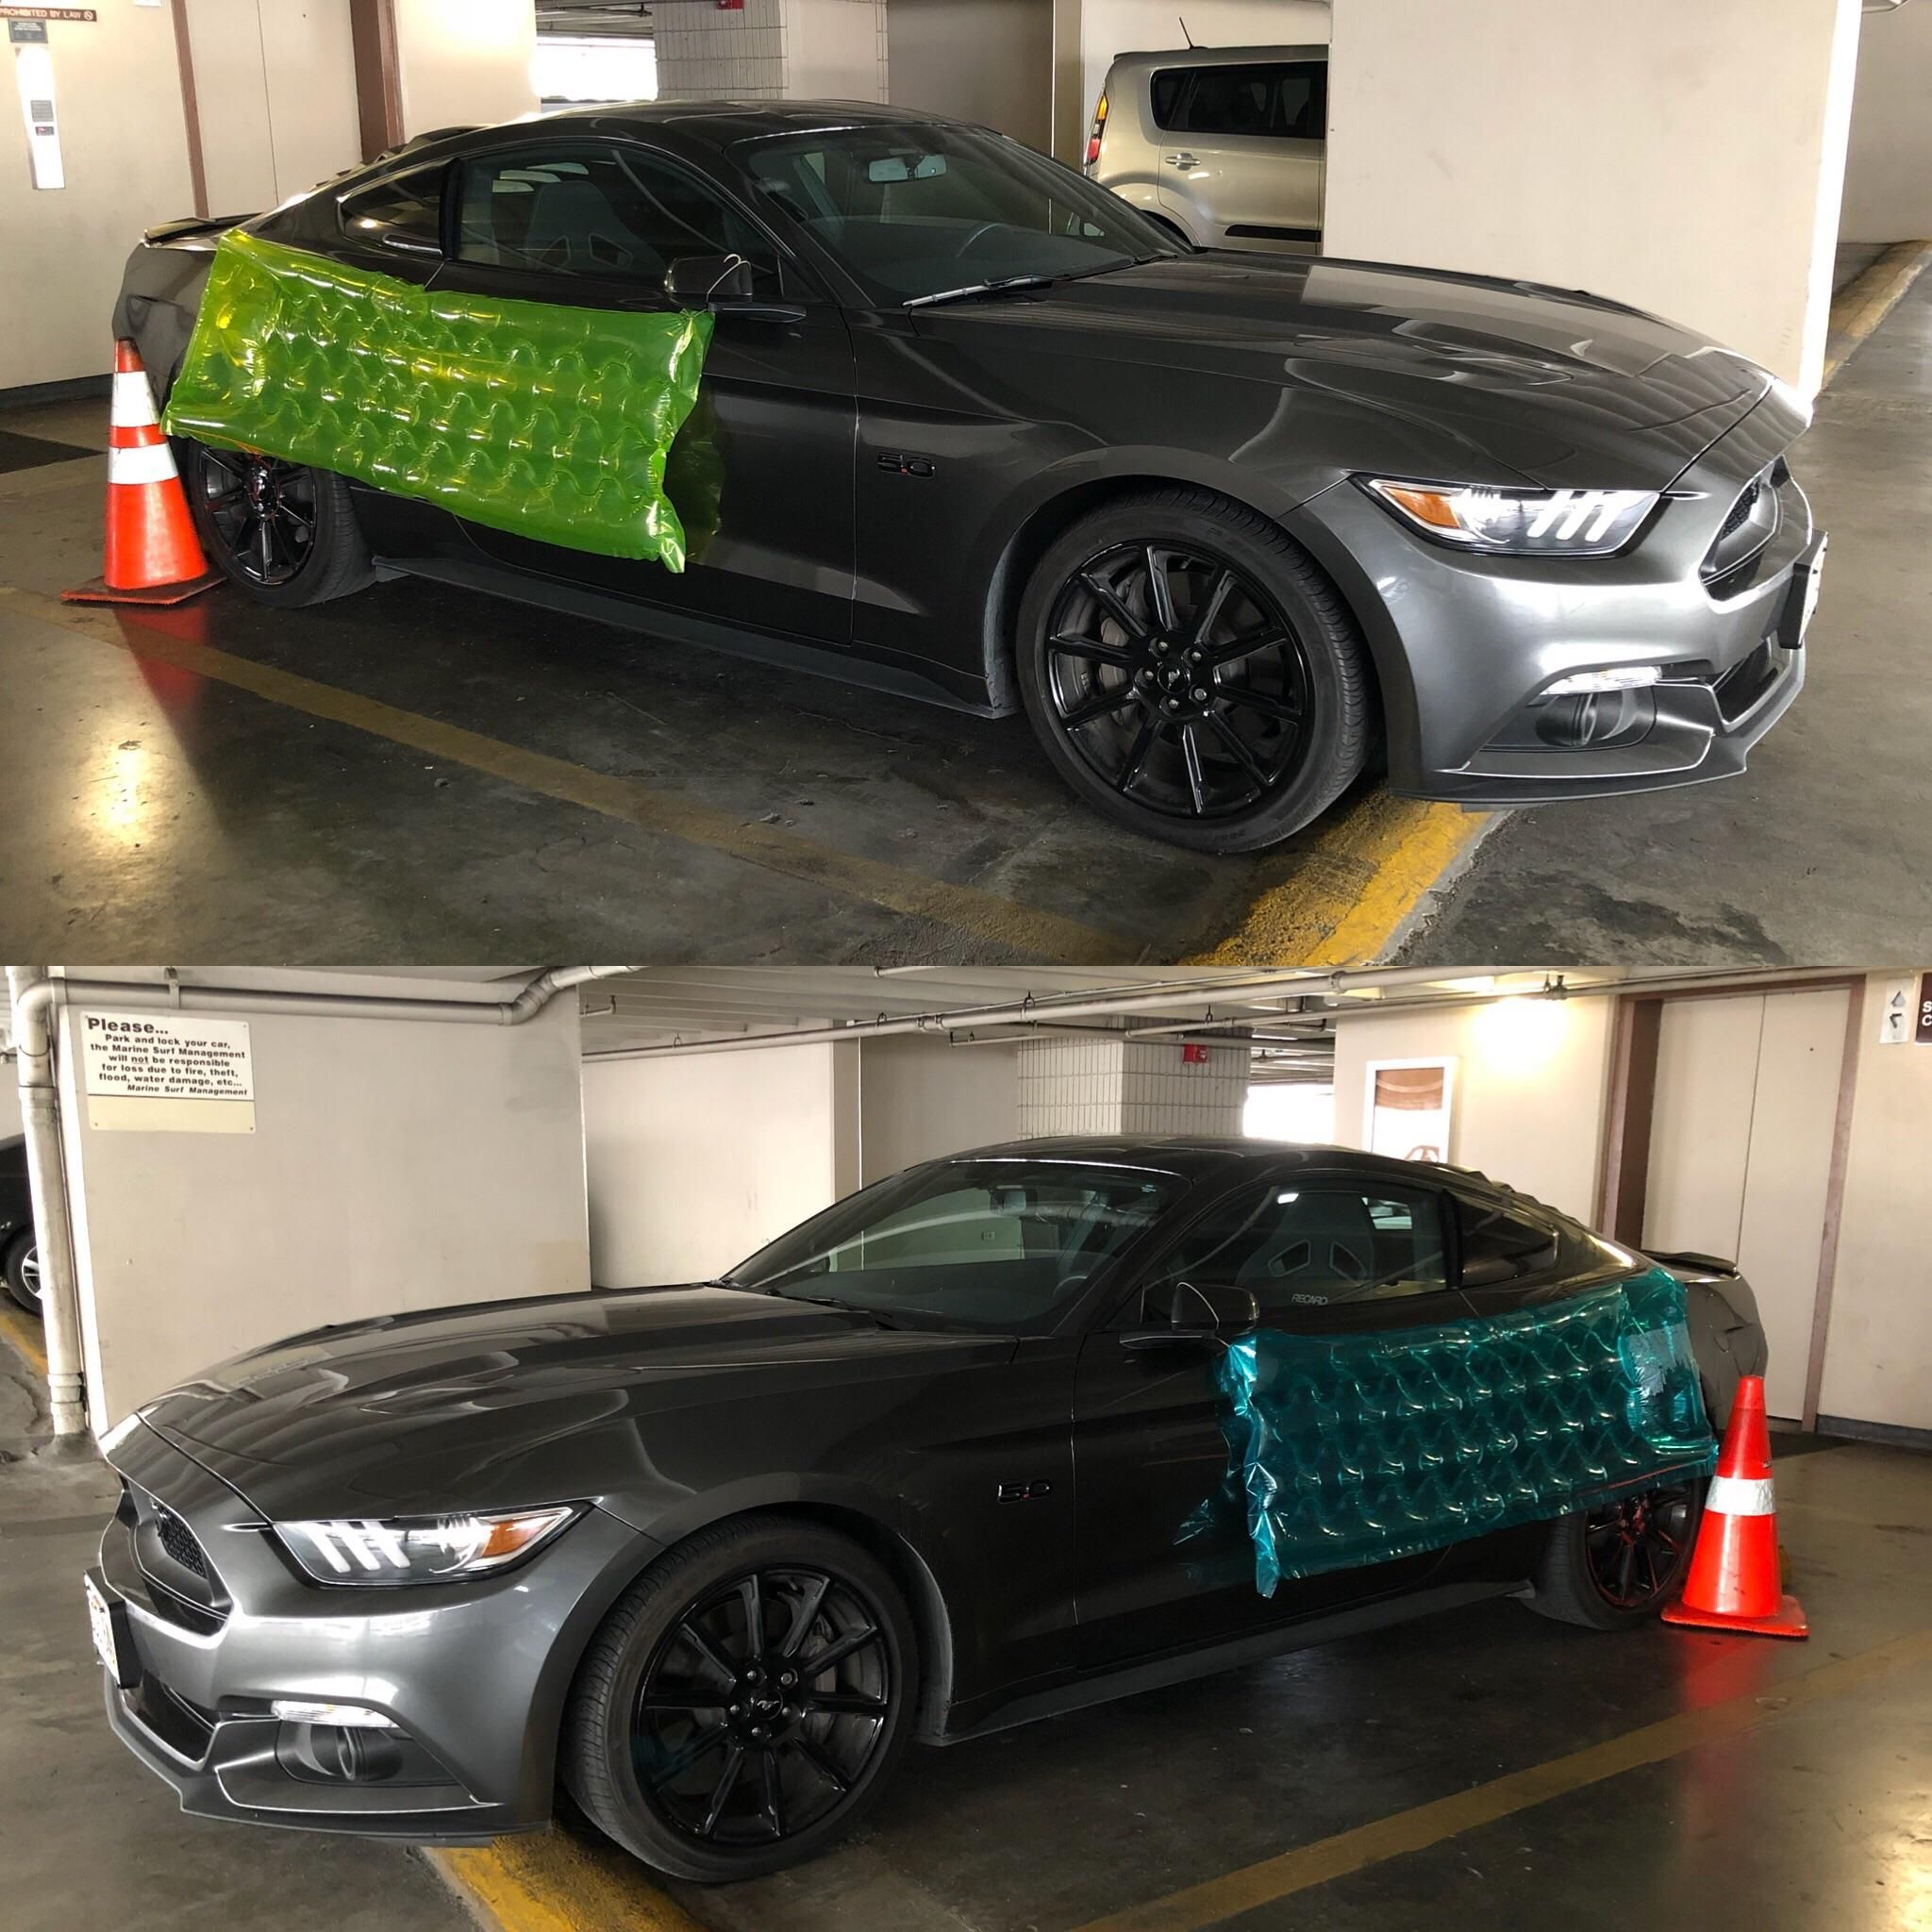 No dents for this guy. The cones are a nice touch